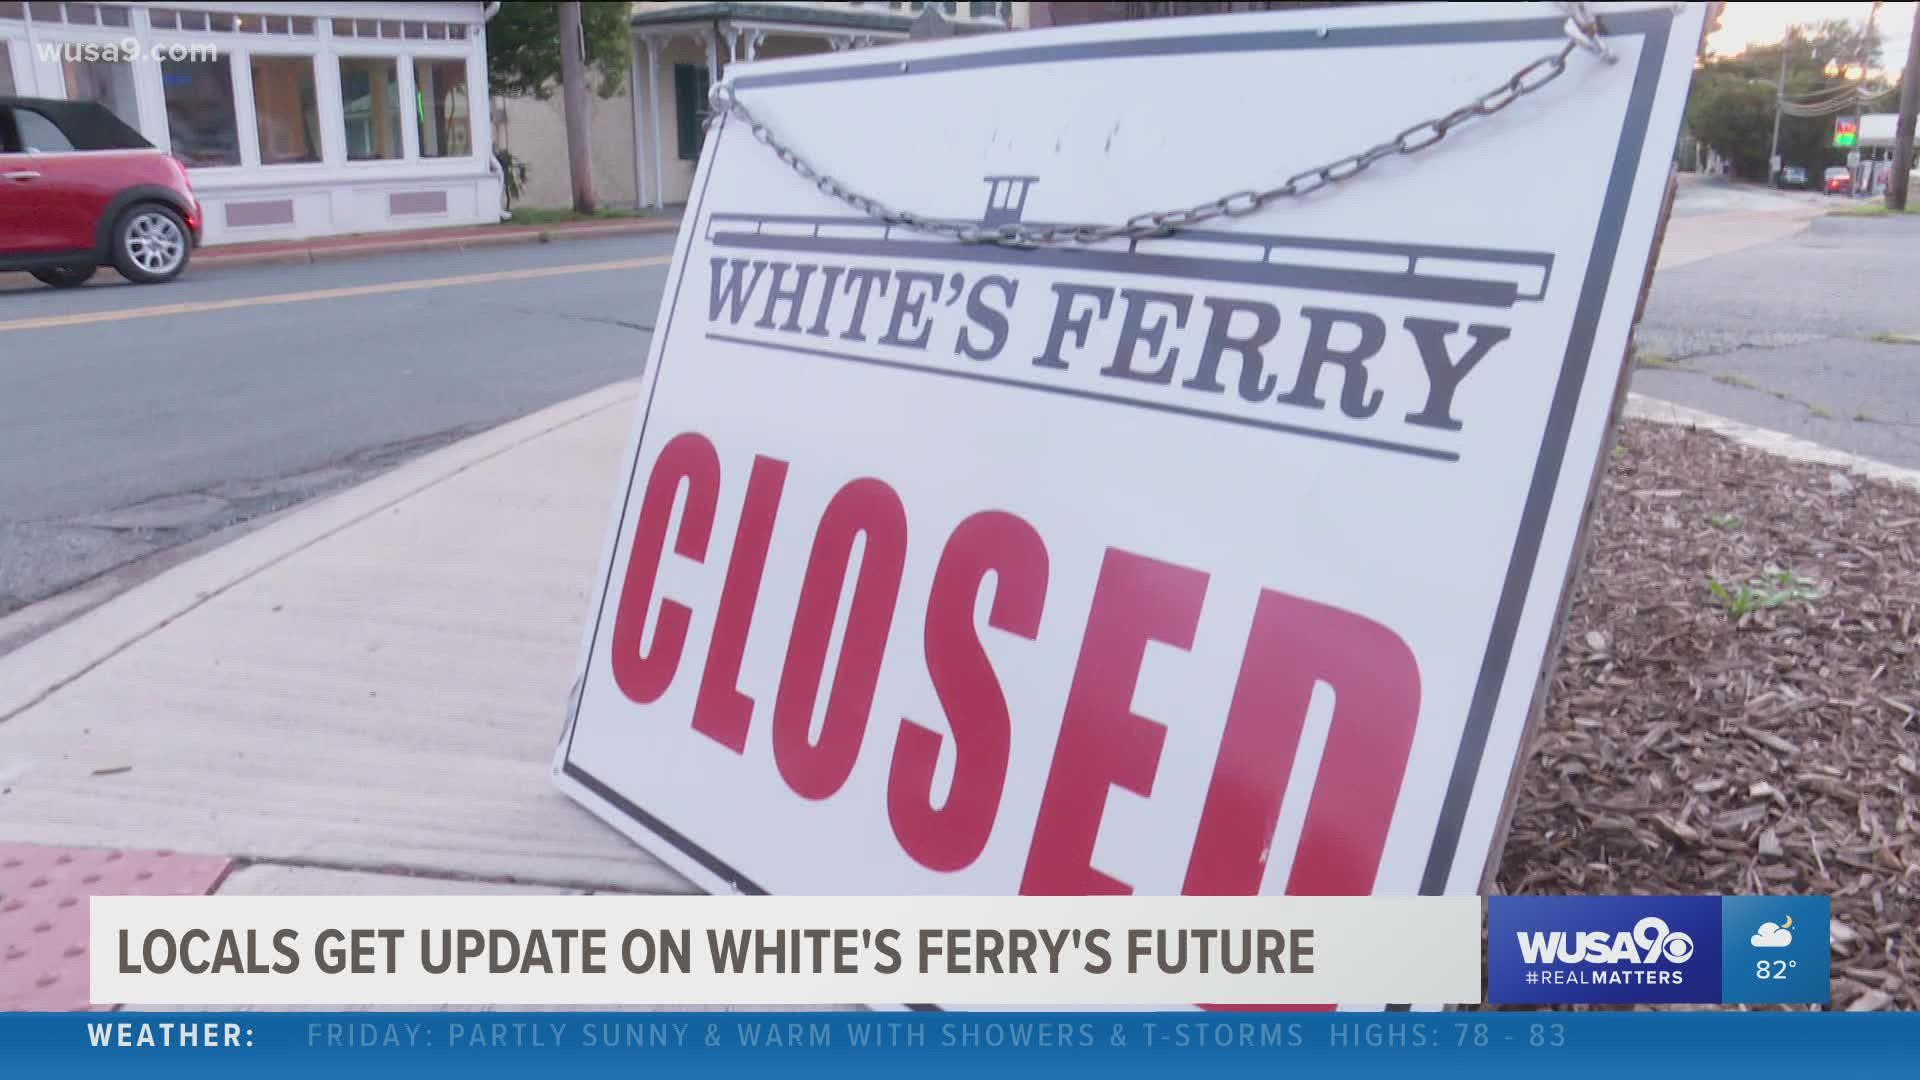 White's Ferry discontinued service across the Potomac River in December 2020 following a legal dispute between its operator and property owners in Virginia.